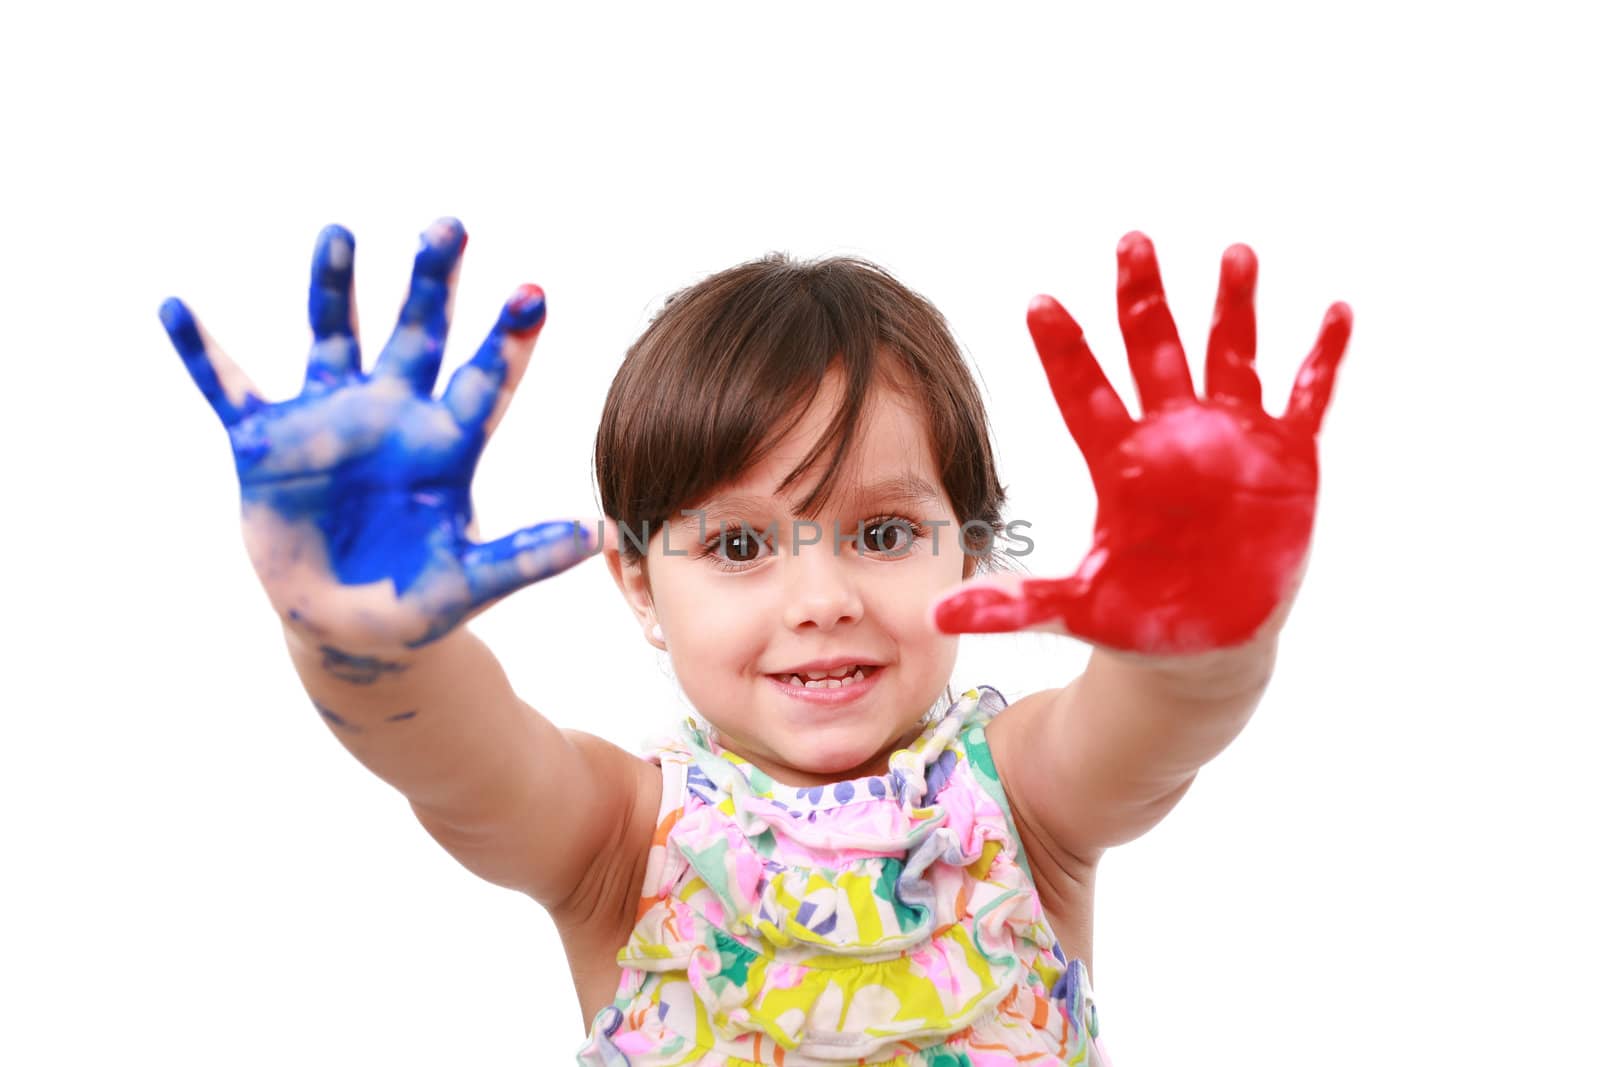 beautiful little girl with her hands in the paint by dacasdo